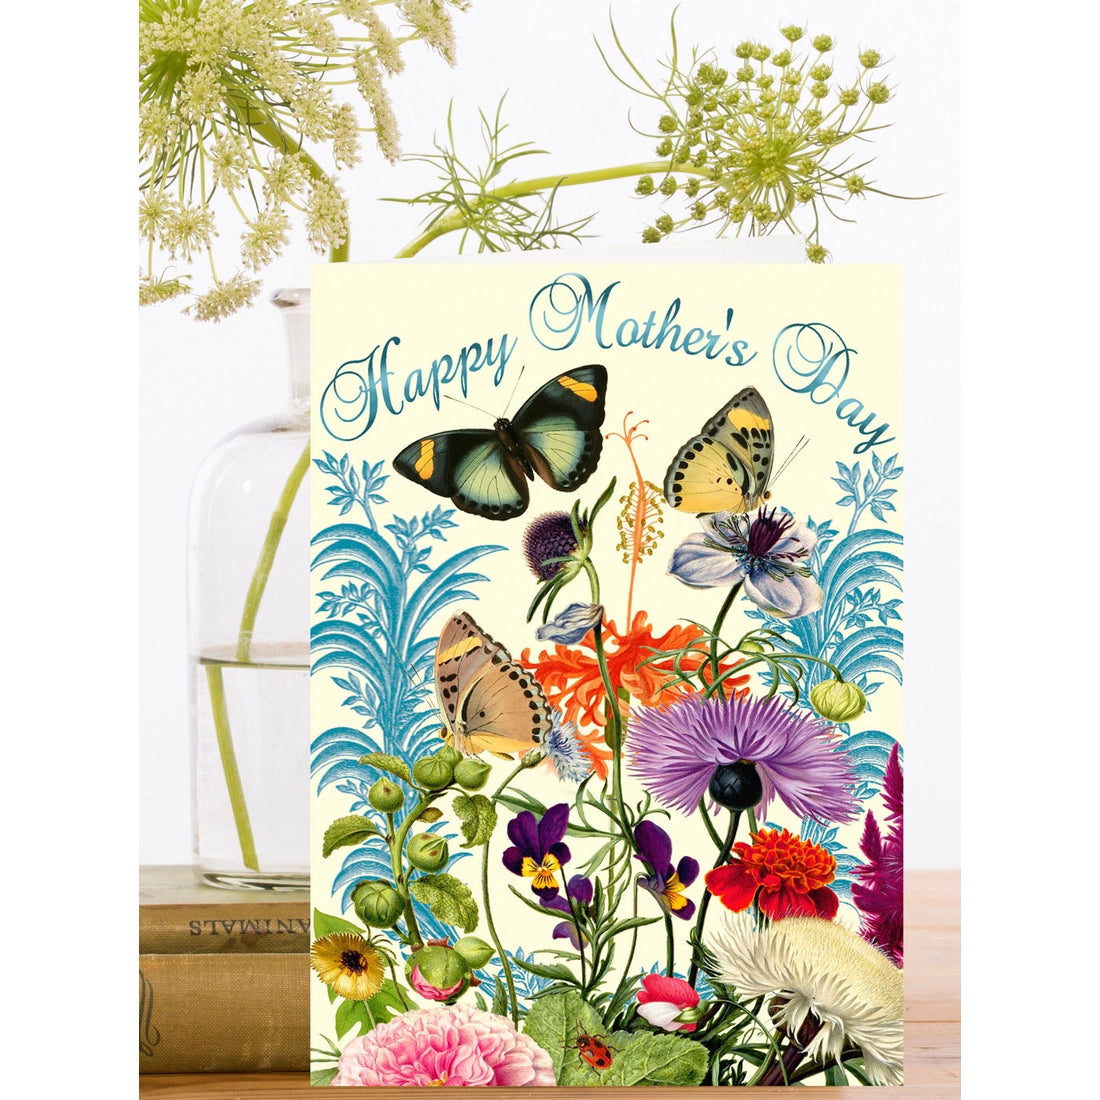 Glittered Butterfly Mother's Day Card